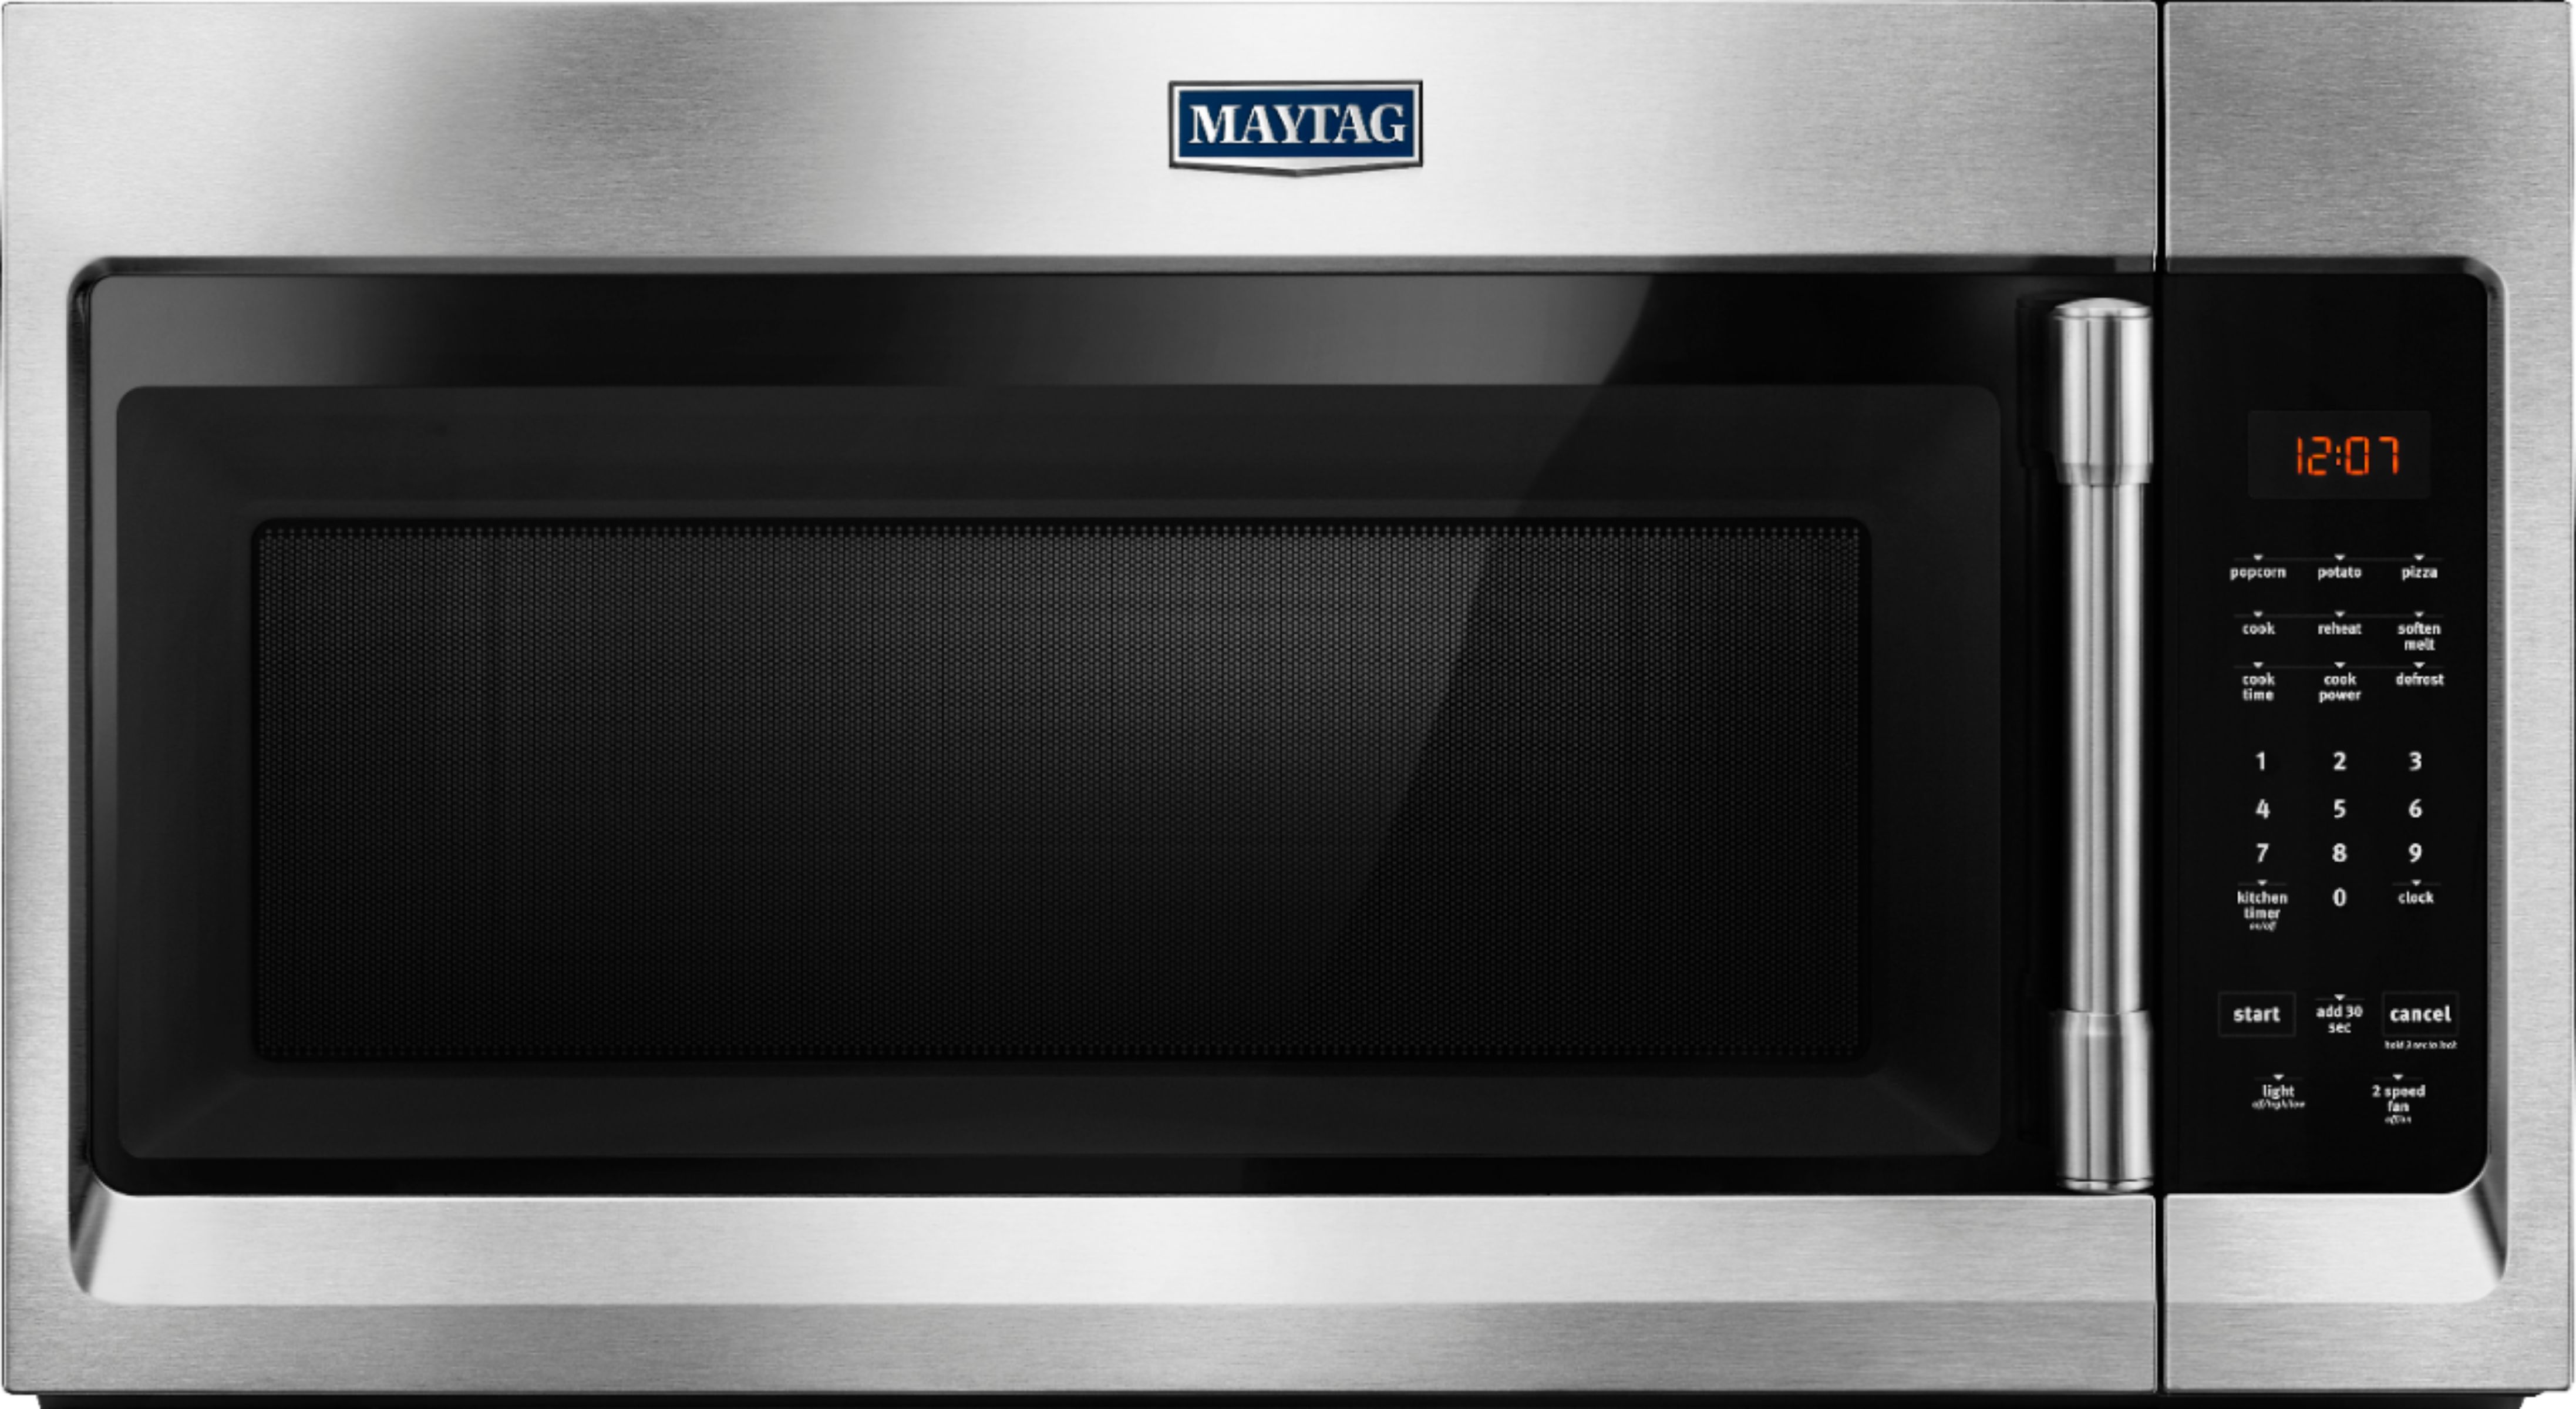 Maytag 1.7 Cu. Ft. Over-the-Range Microwave Stainless steel MMV1174FZ